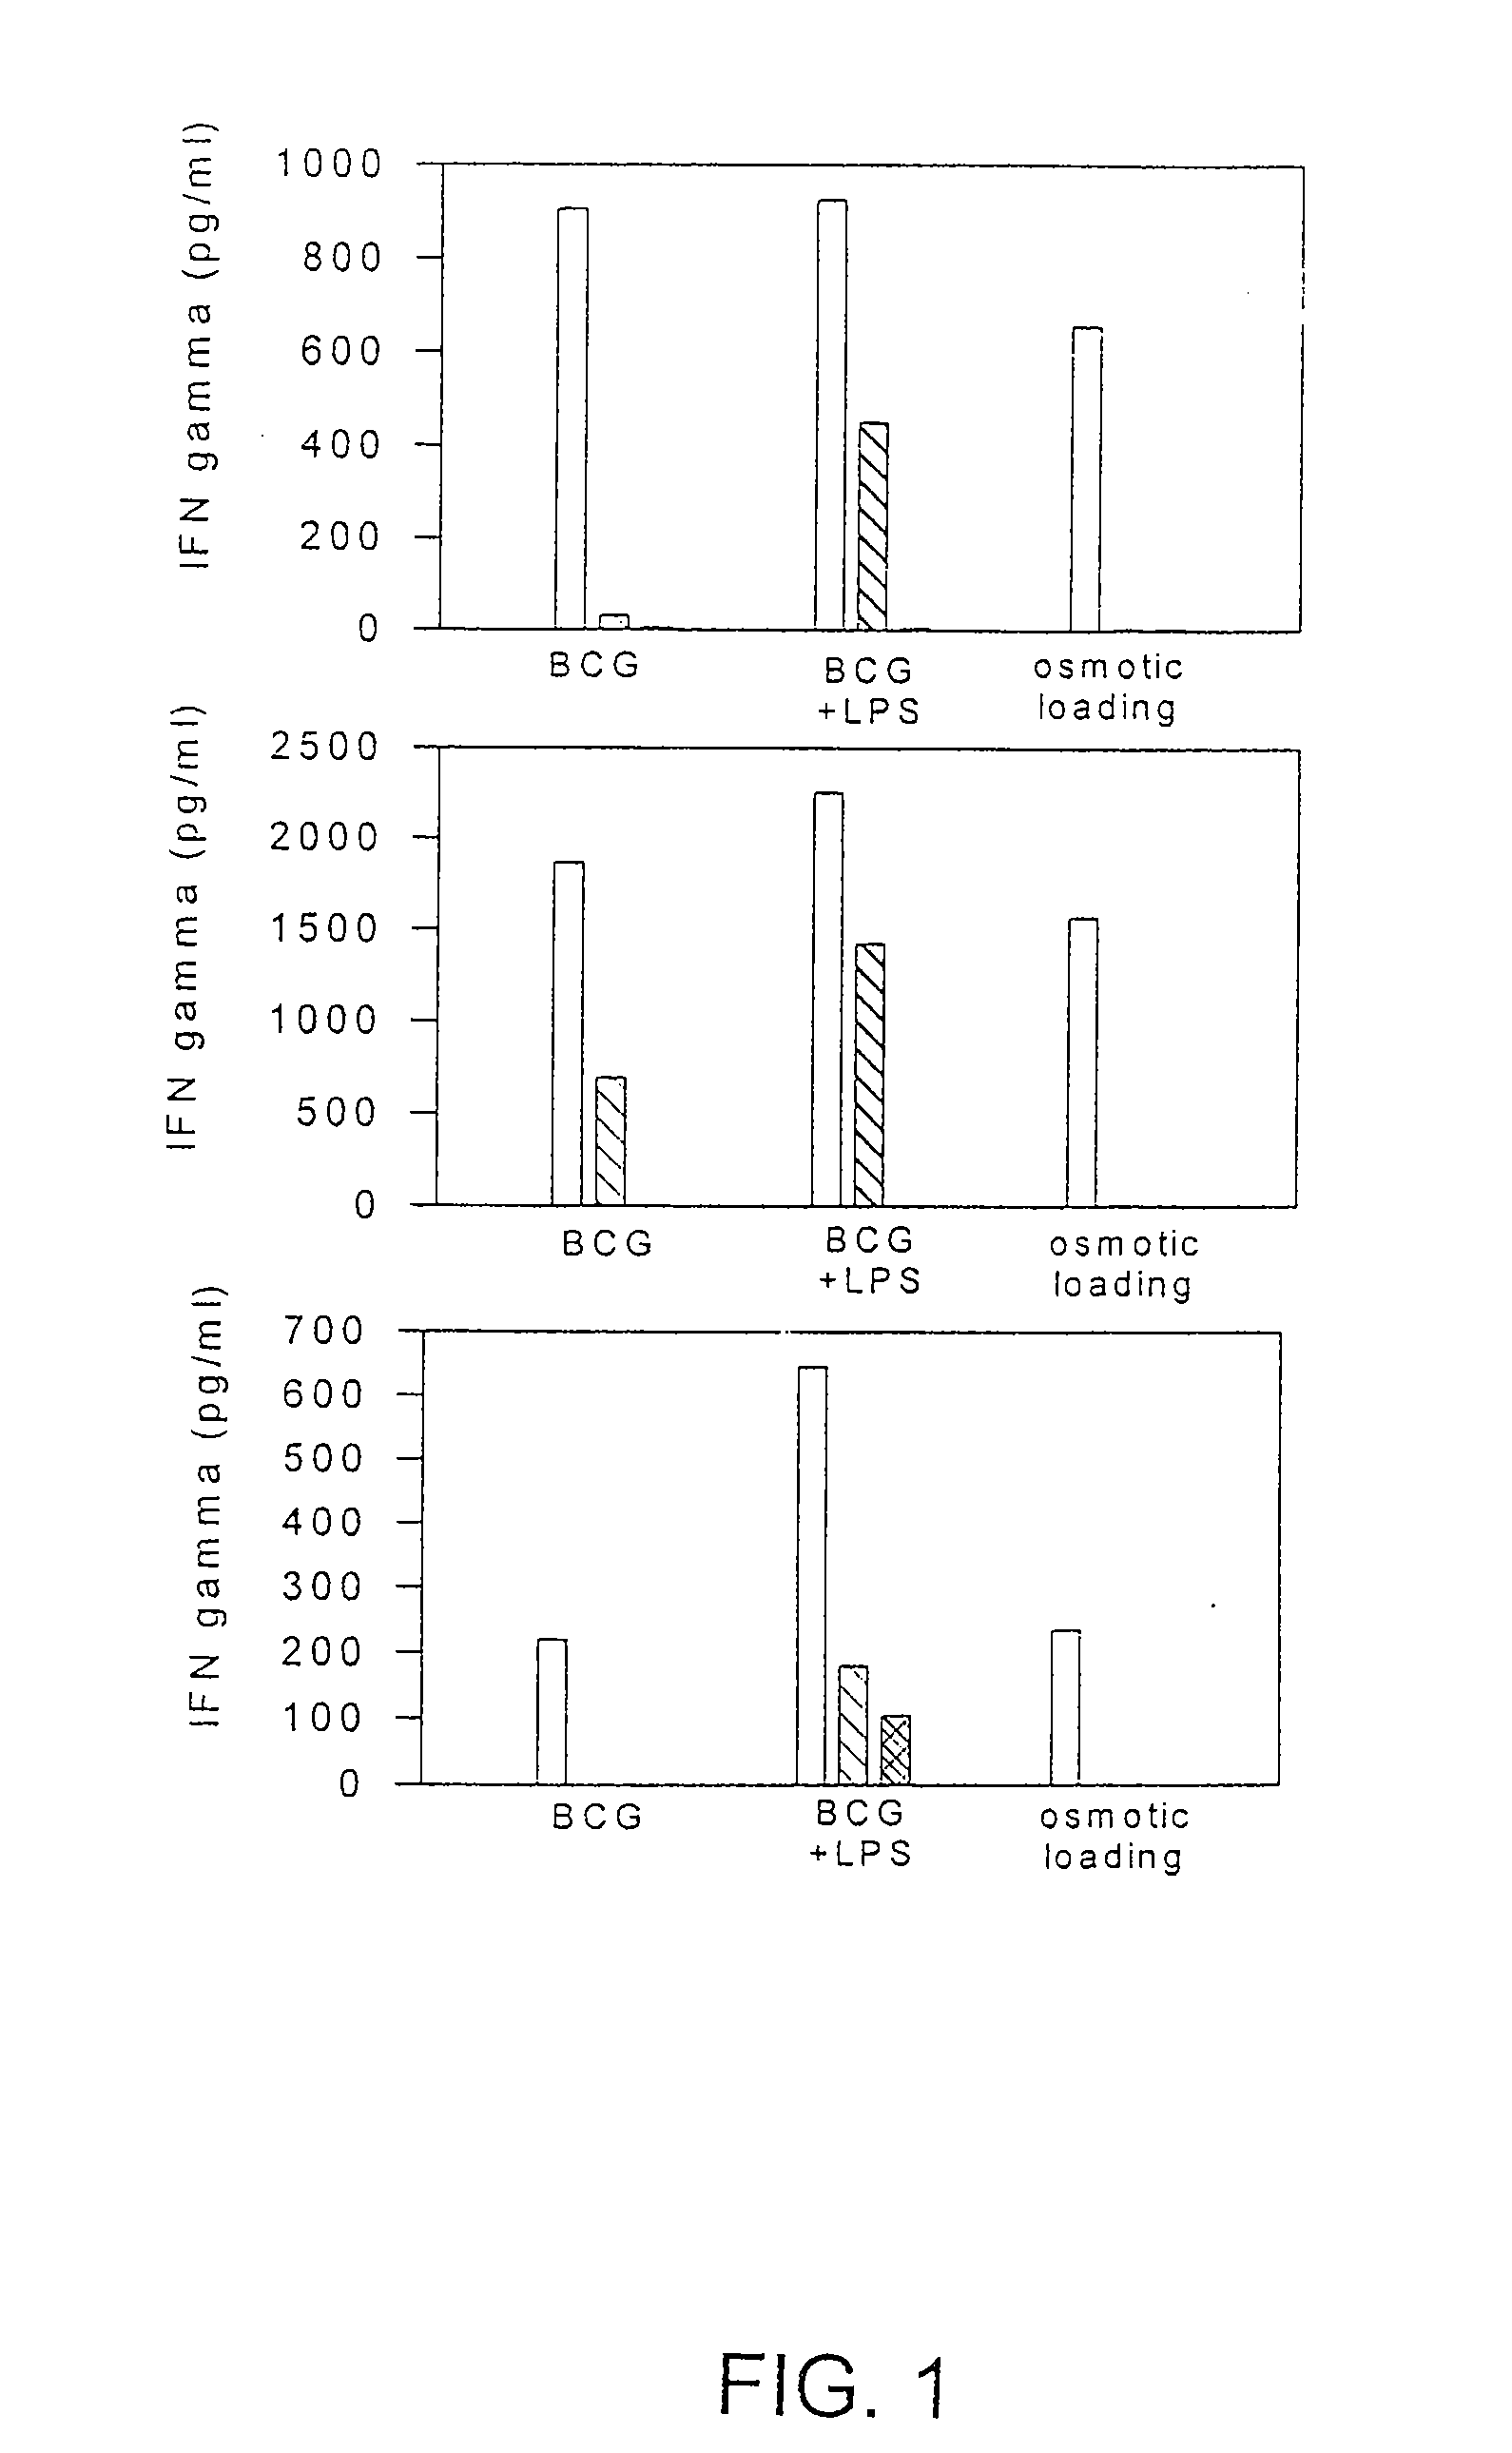 Method to increase class i presentation of exogenous antigens by human dendritic cells